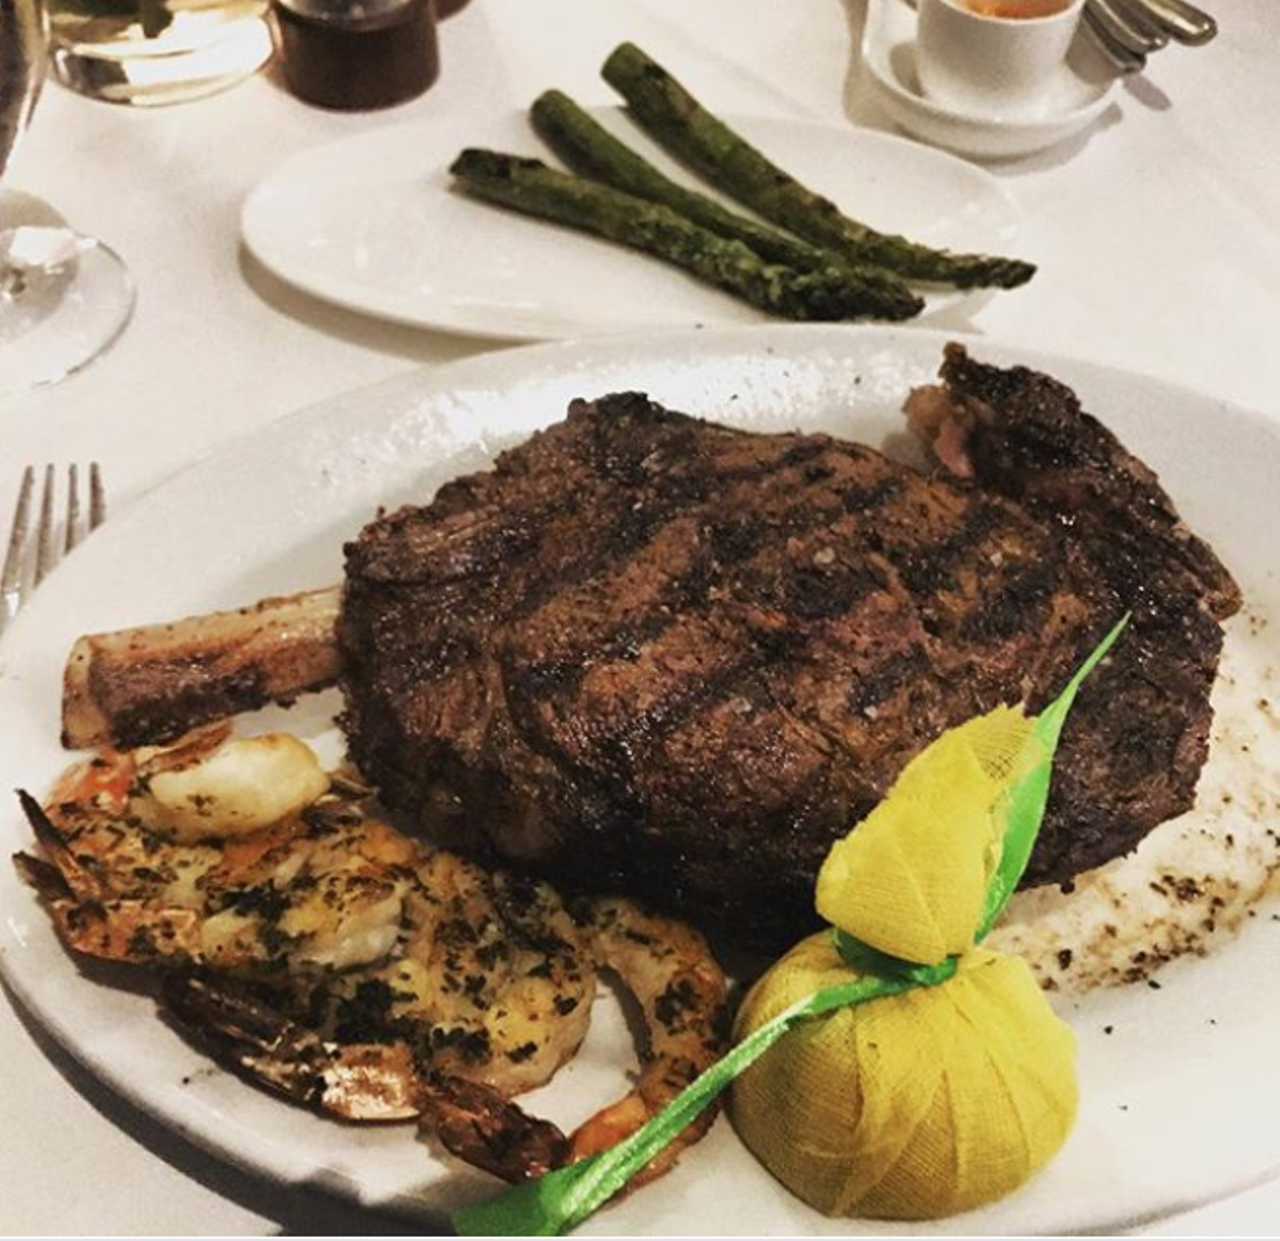 J Prime Steakhouse
1401 North Loop 1604 W, (210) 764-1604, jprimesteakhouse.com
Be prepared to bring the big bucks for a J Prime steak. With specialty cuts starting at $49, this is a spot reserved for special occasions.
Photo via Instagram / neilgarcia.13